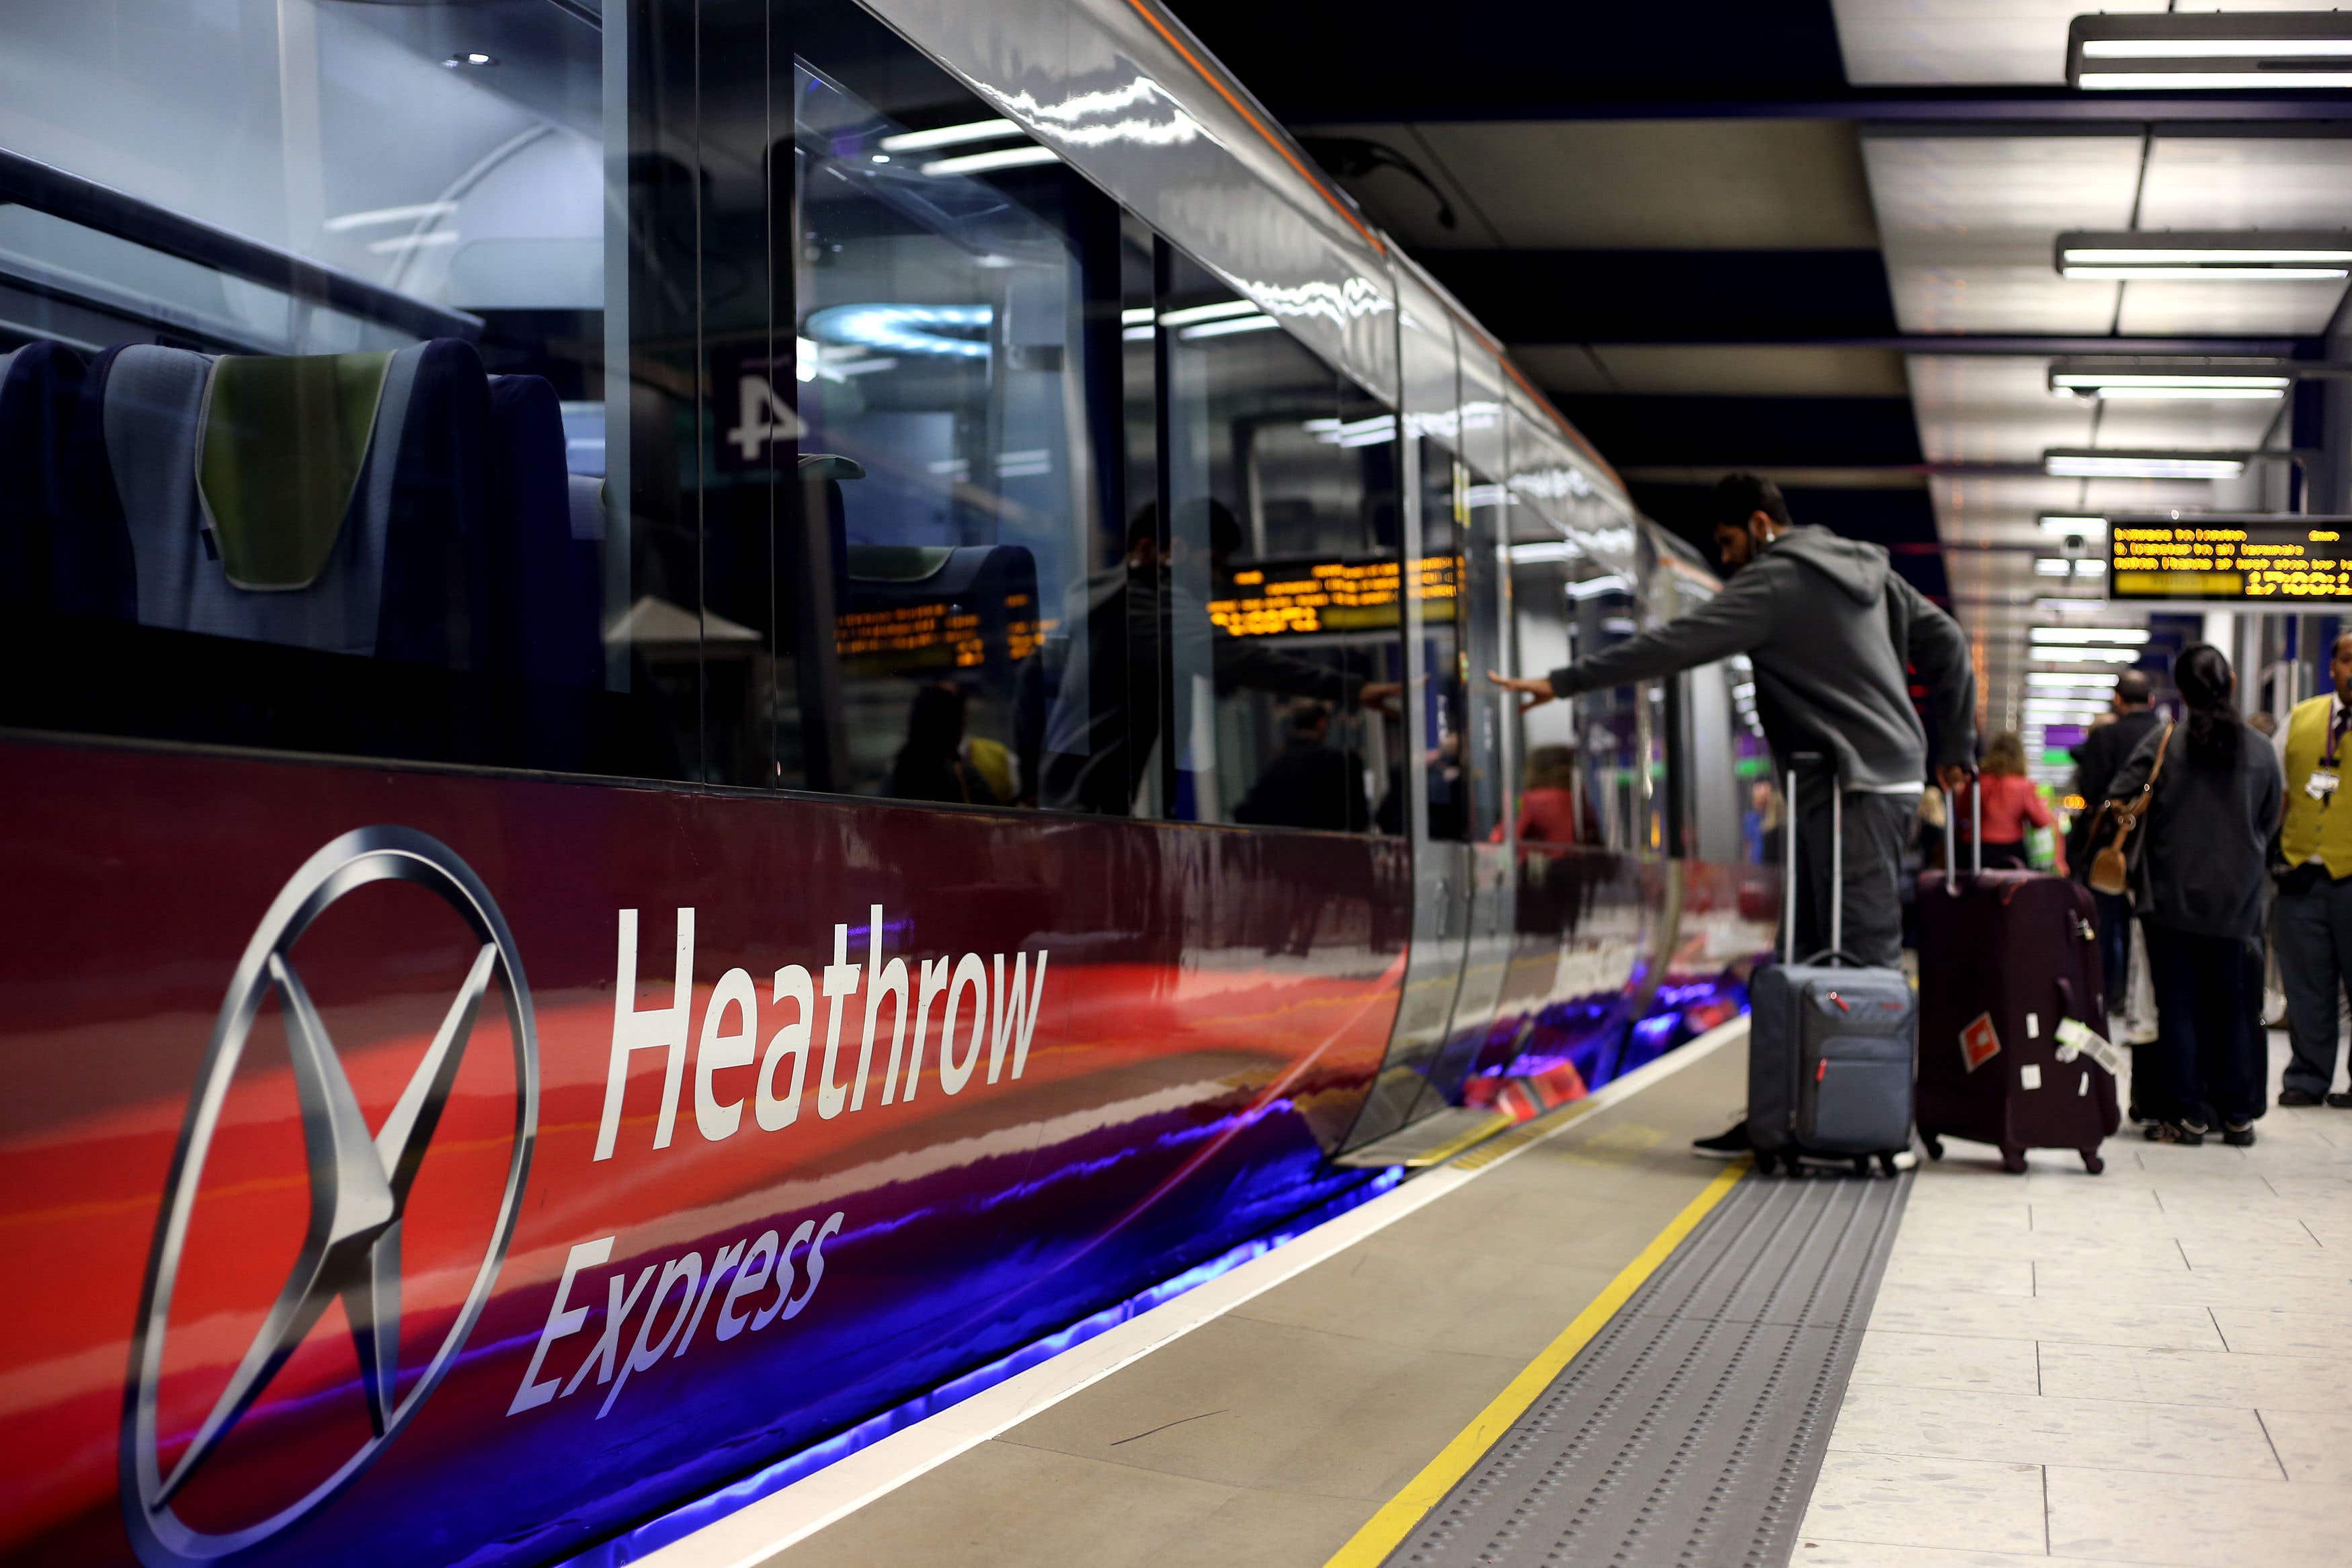 The Aslef strike means the frequency of the Heathrow Express will be halved from four trains an hour to two on Thursday